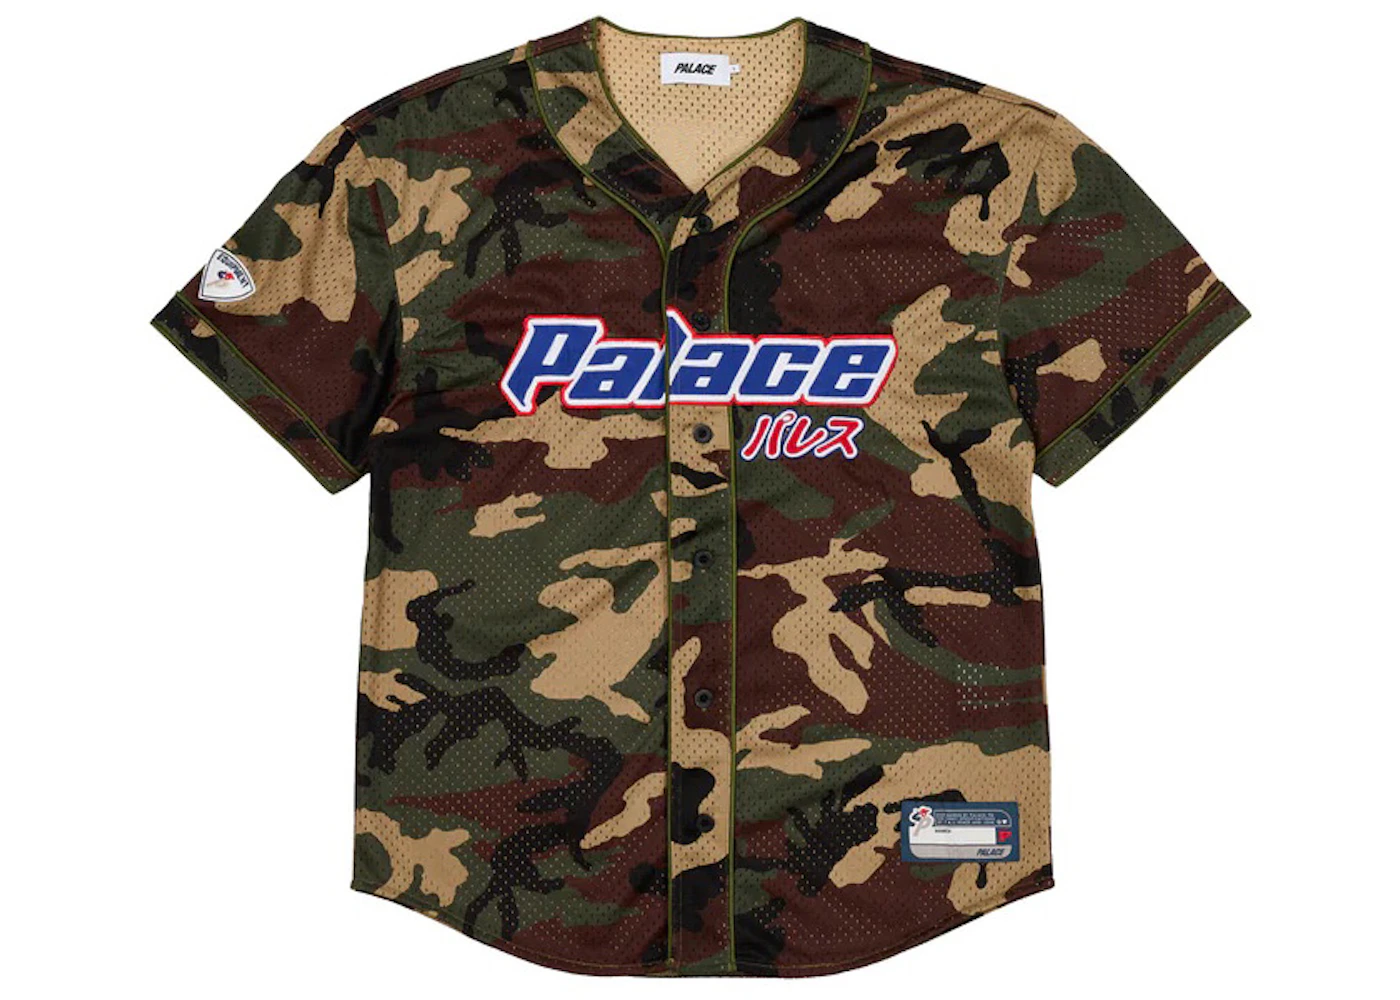 camouflage padres jersey